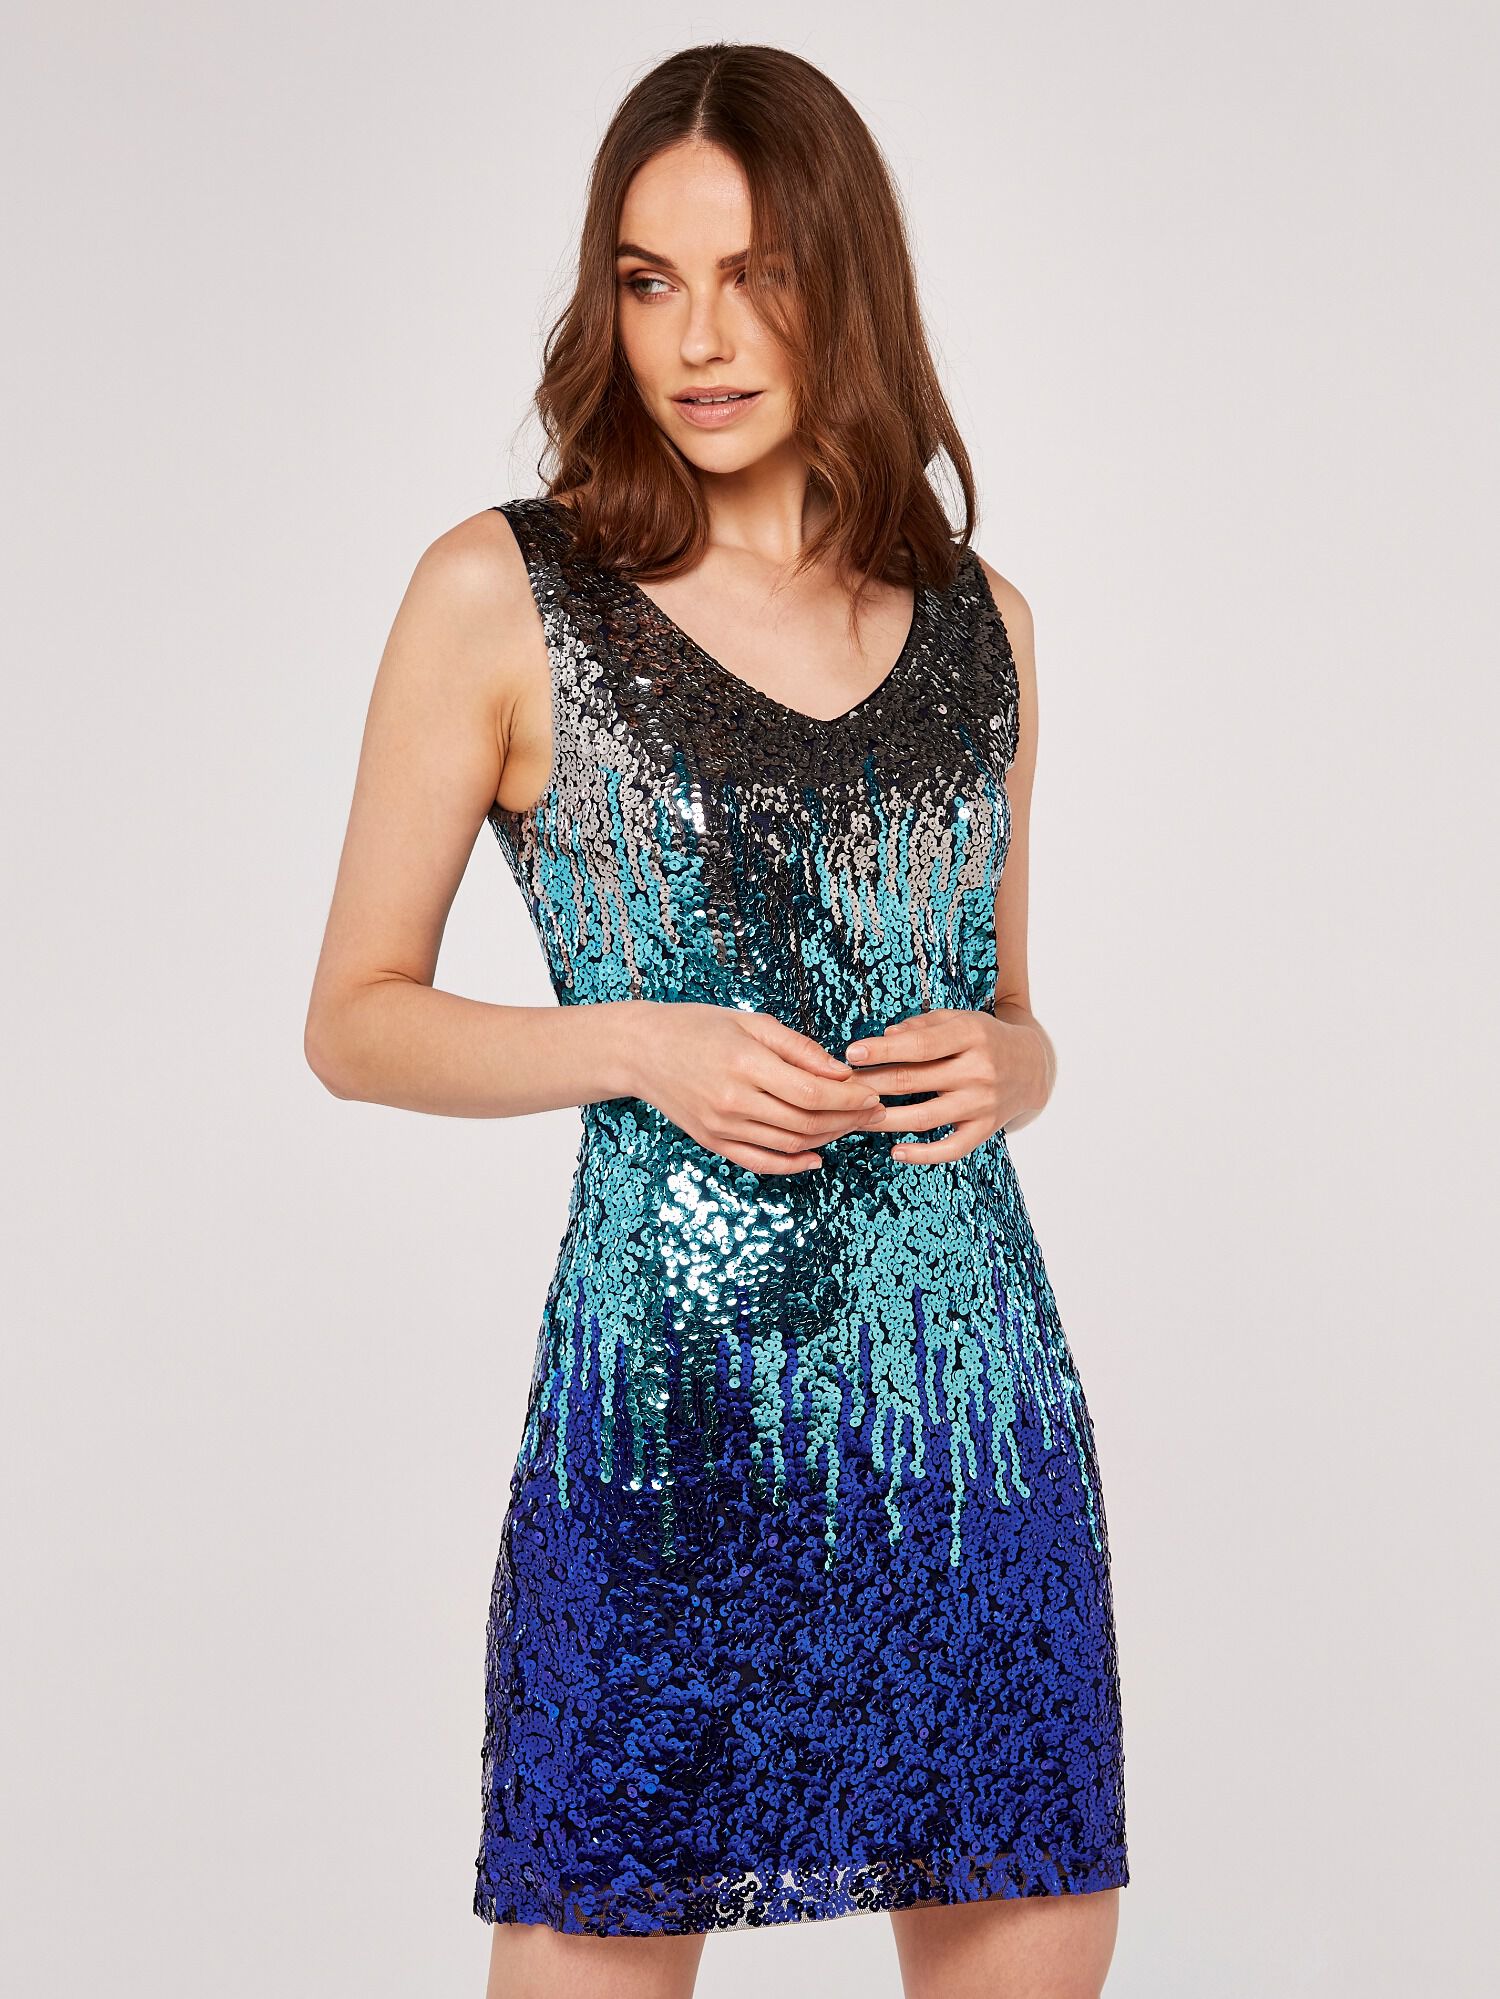 YWDJ Night Out Dress for Women Sequin Dress for Women Formal Sequin Sparkly  Slip Sleeveless V Neck Solid Make Party Sparkly Dresses Bodycon Dresses  Night Club Dress for Women for Night Out